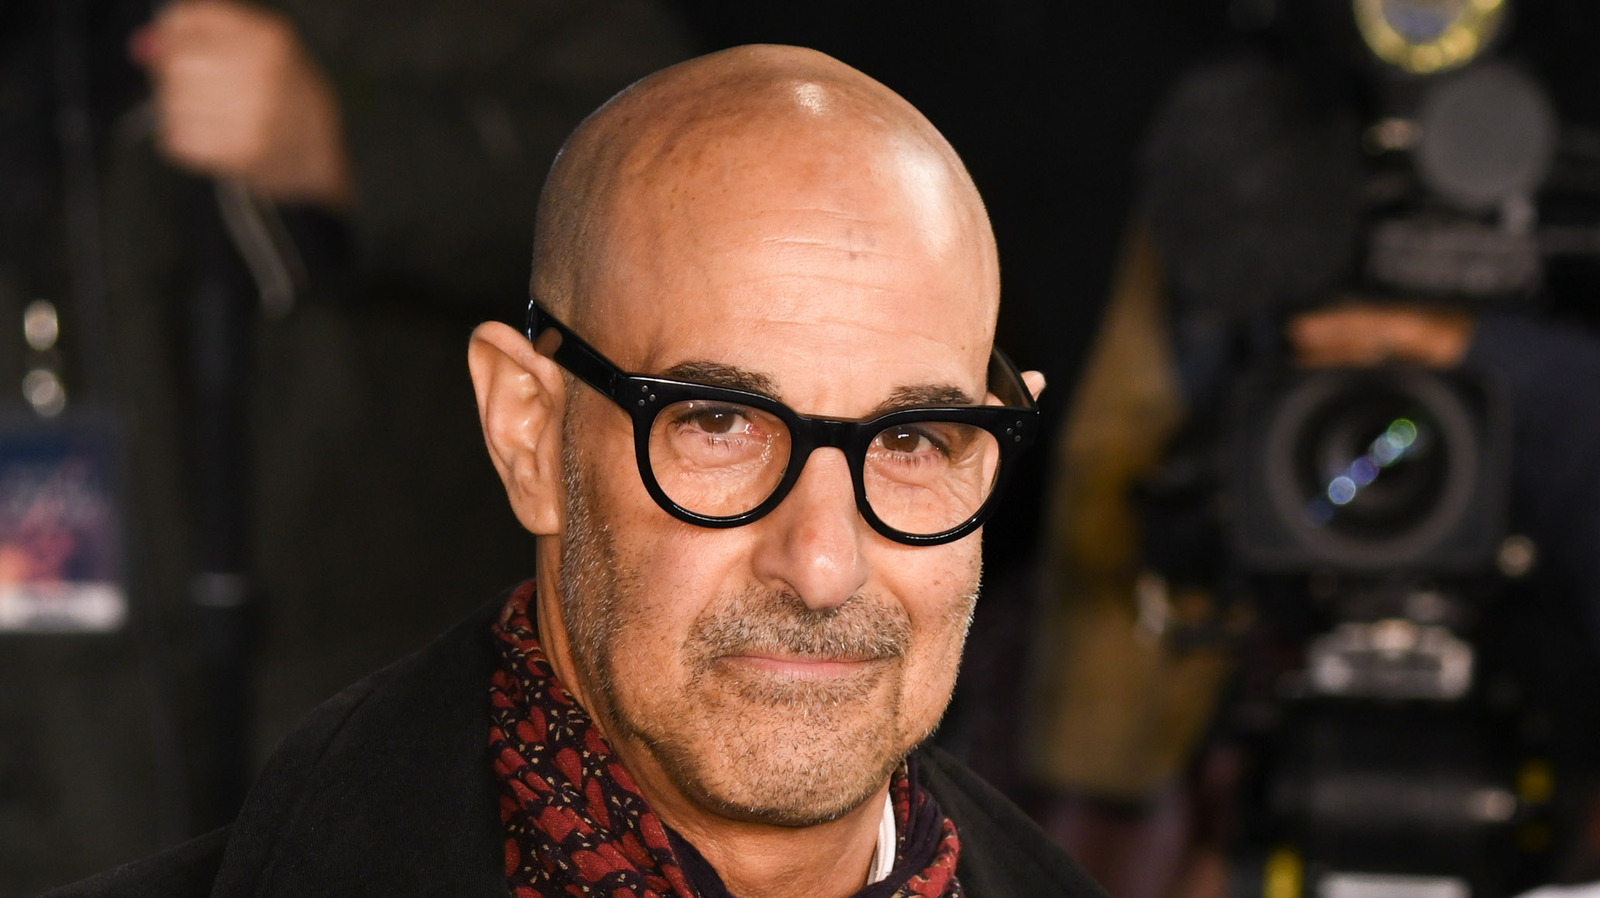 https://www.mashed.com/img/gallery/were-simply-falling-for-these-savory-stanley-tucci-cooking-tips/l-intro-1680638895.jpg